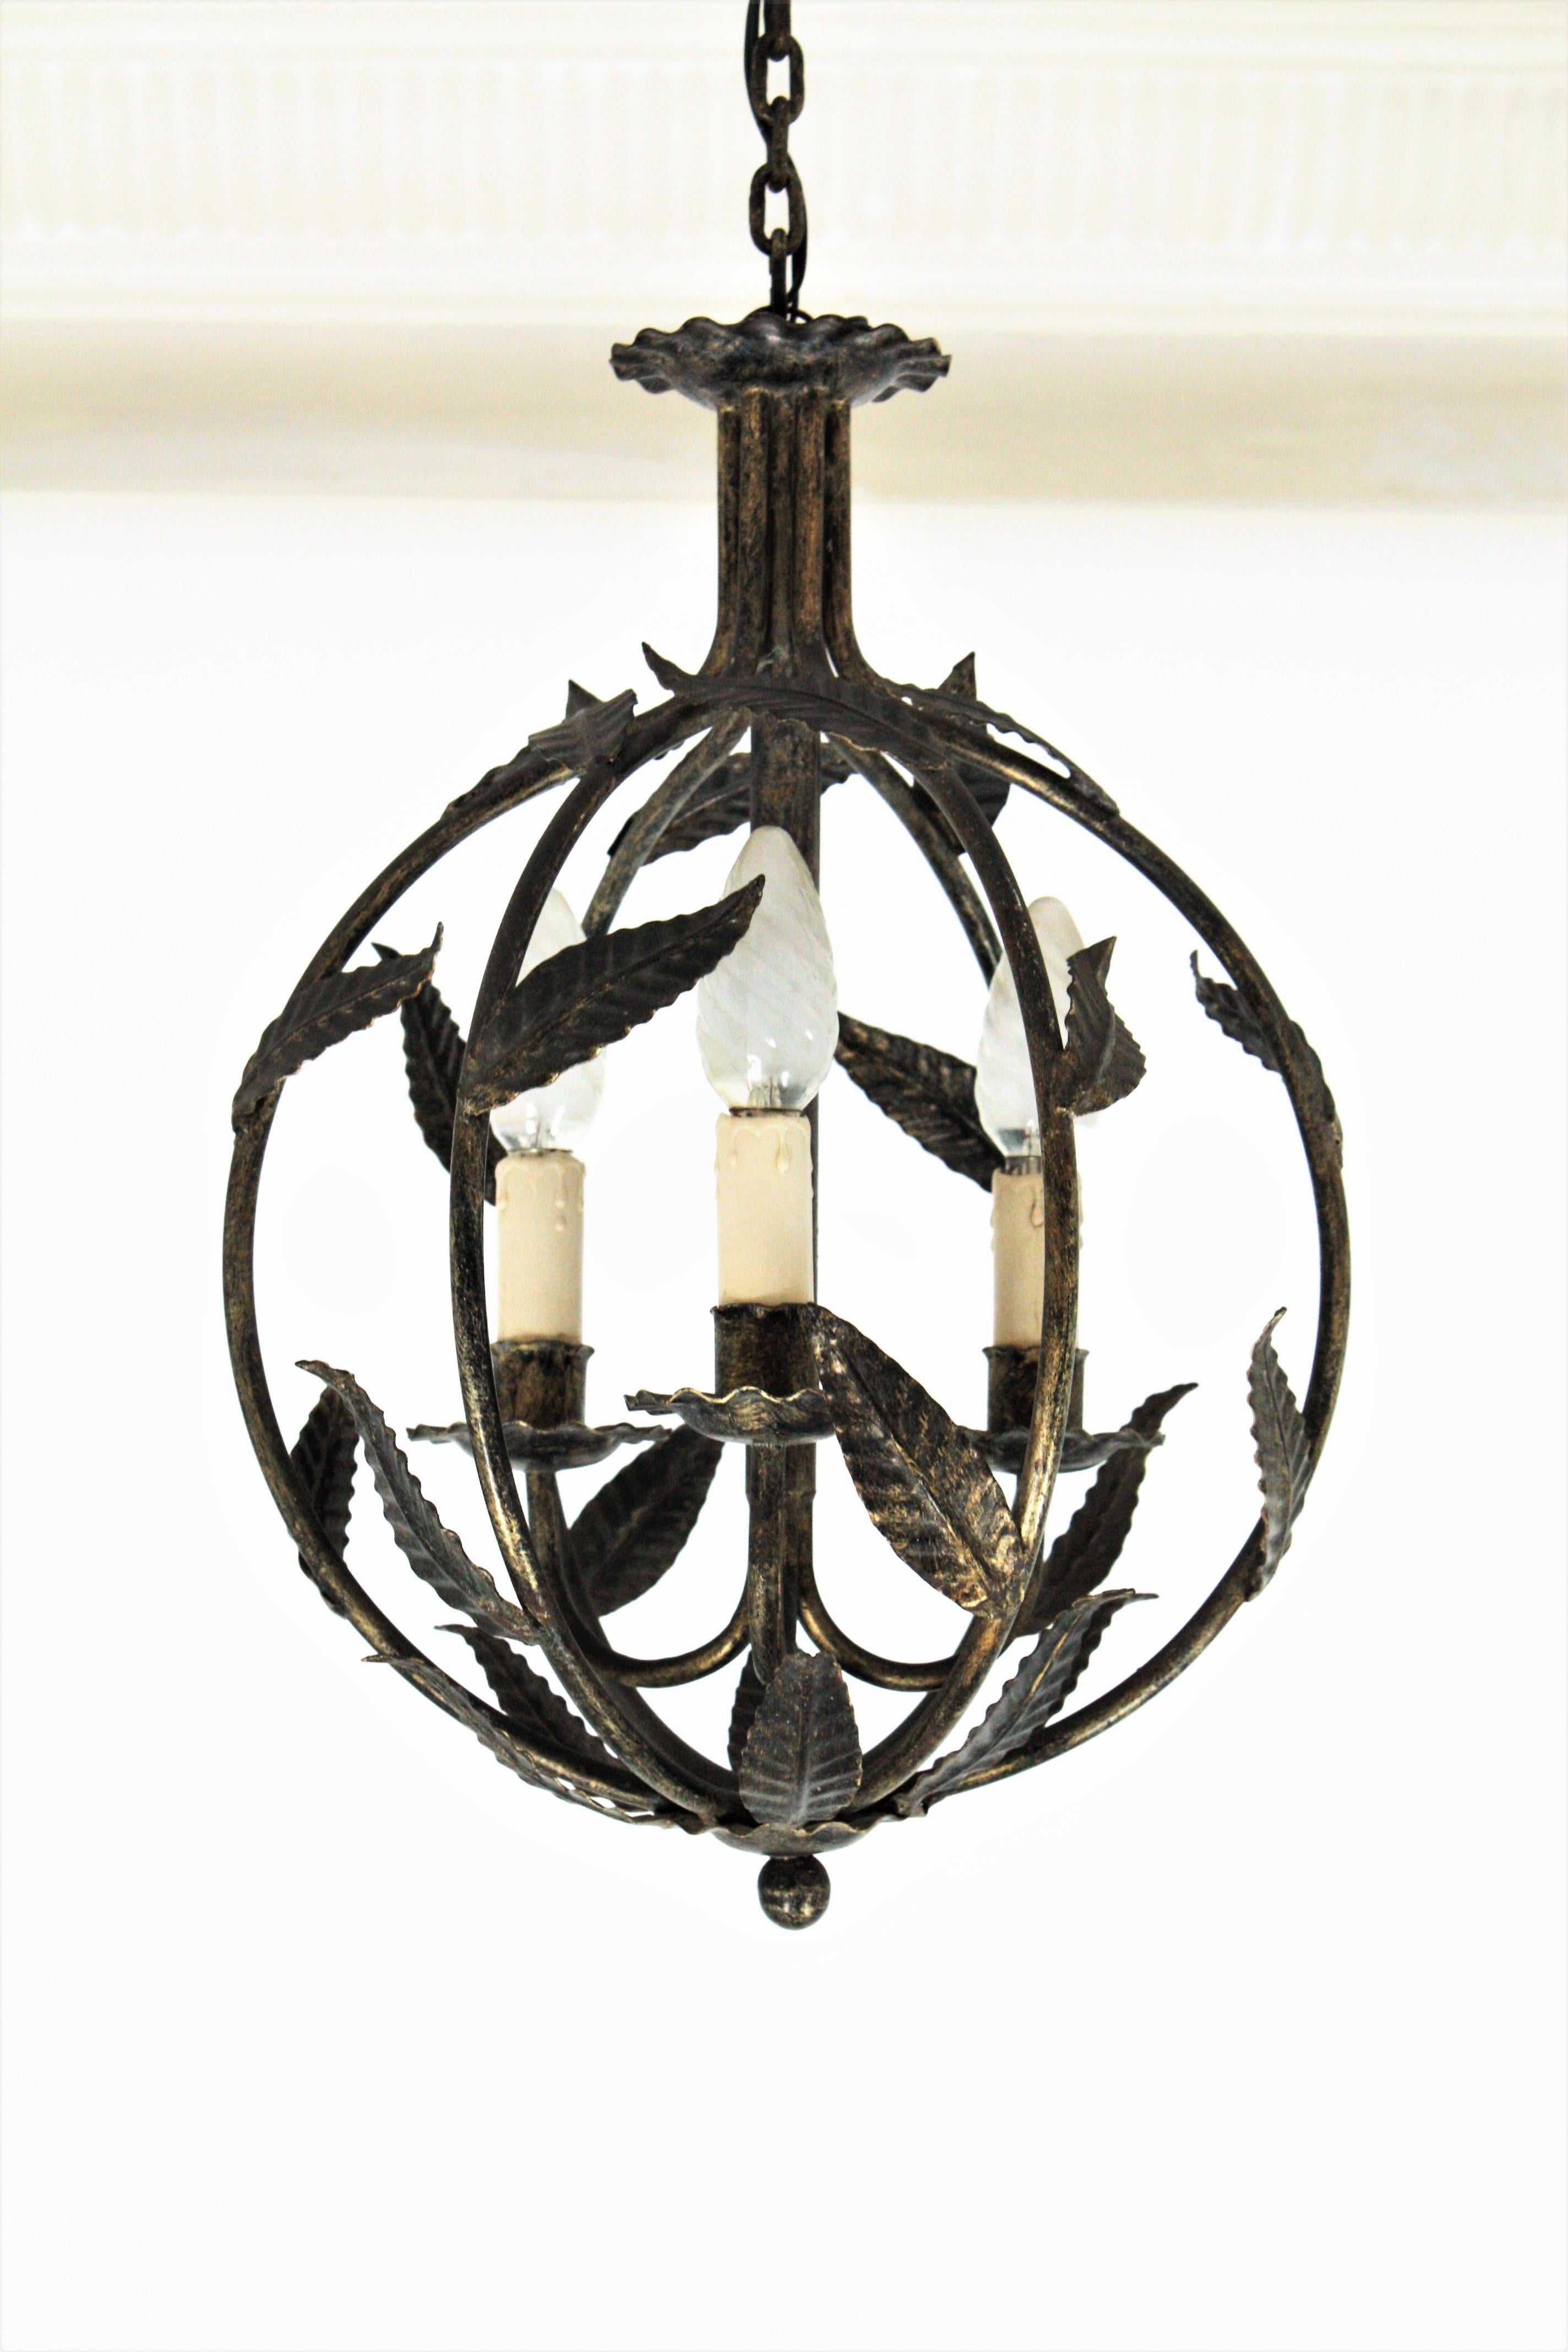 Eye-catching three-light wrought iron globe pendant or lantern with leaf motif design, France, 1940s.
This chandelier features a patinated iron globe shaped structure decorated with leaves and gilt accents. It hangs from a chain holded by a